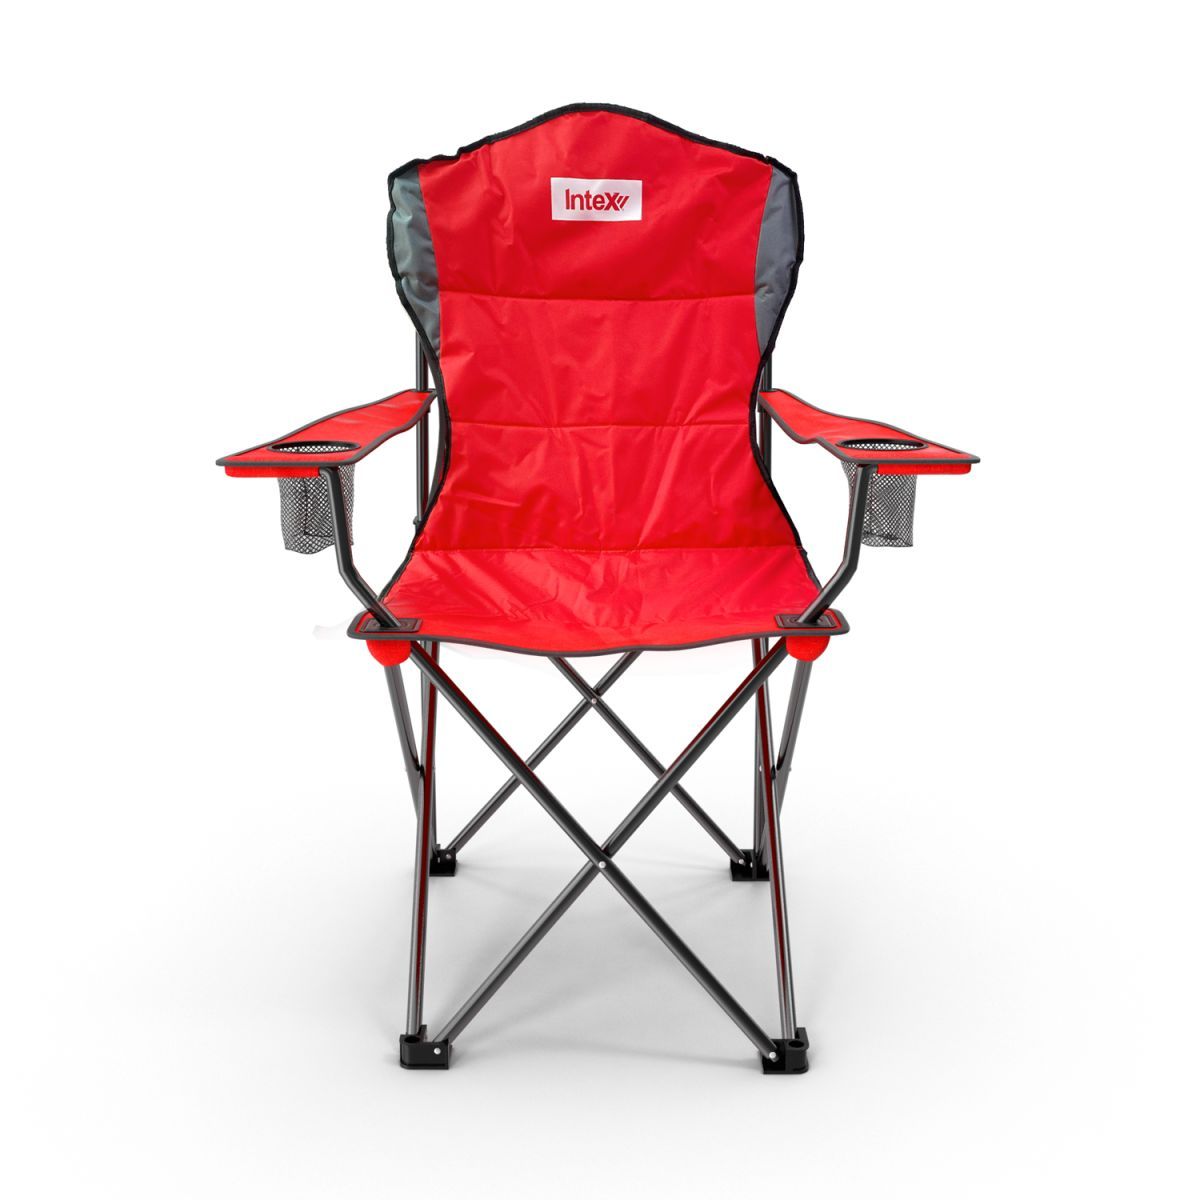 Deluxe Camping Chair
